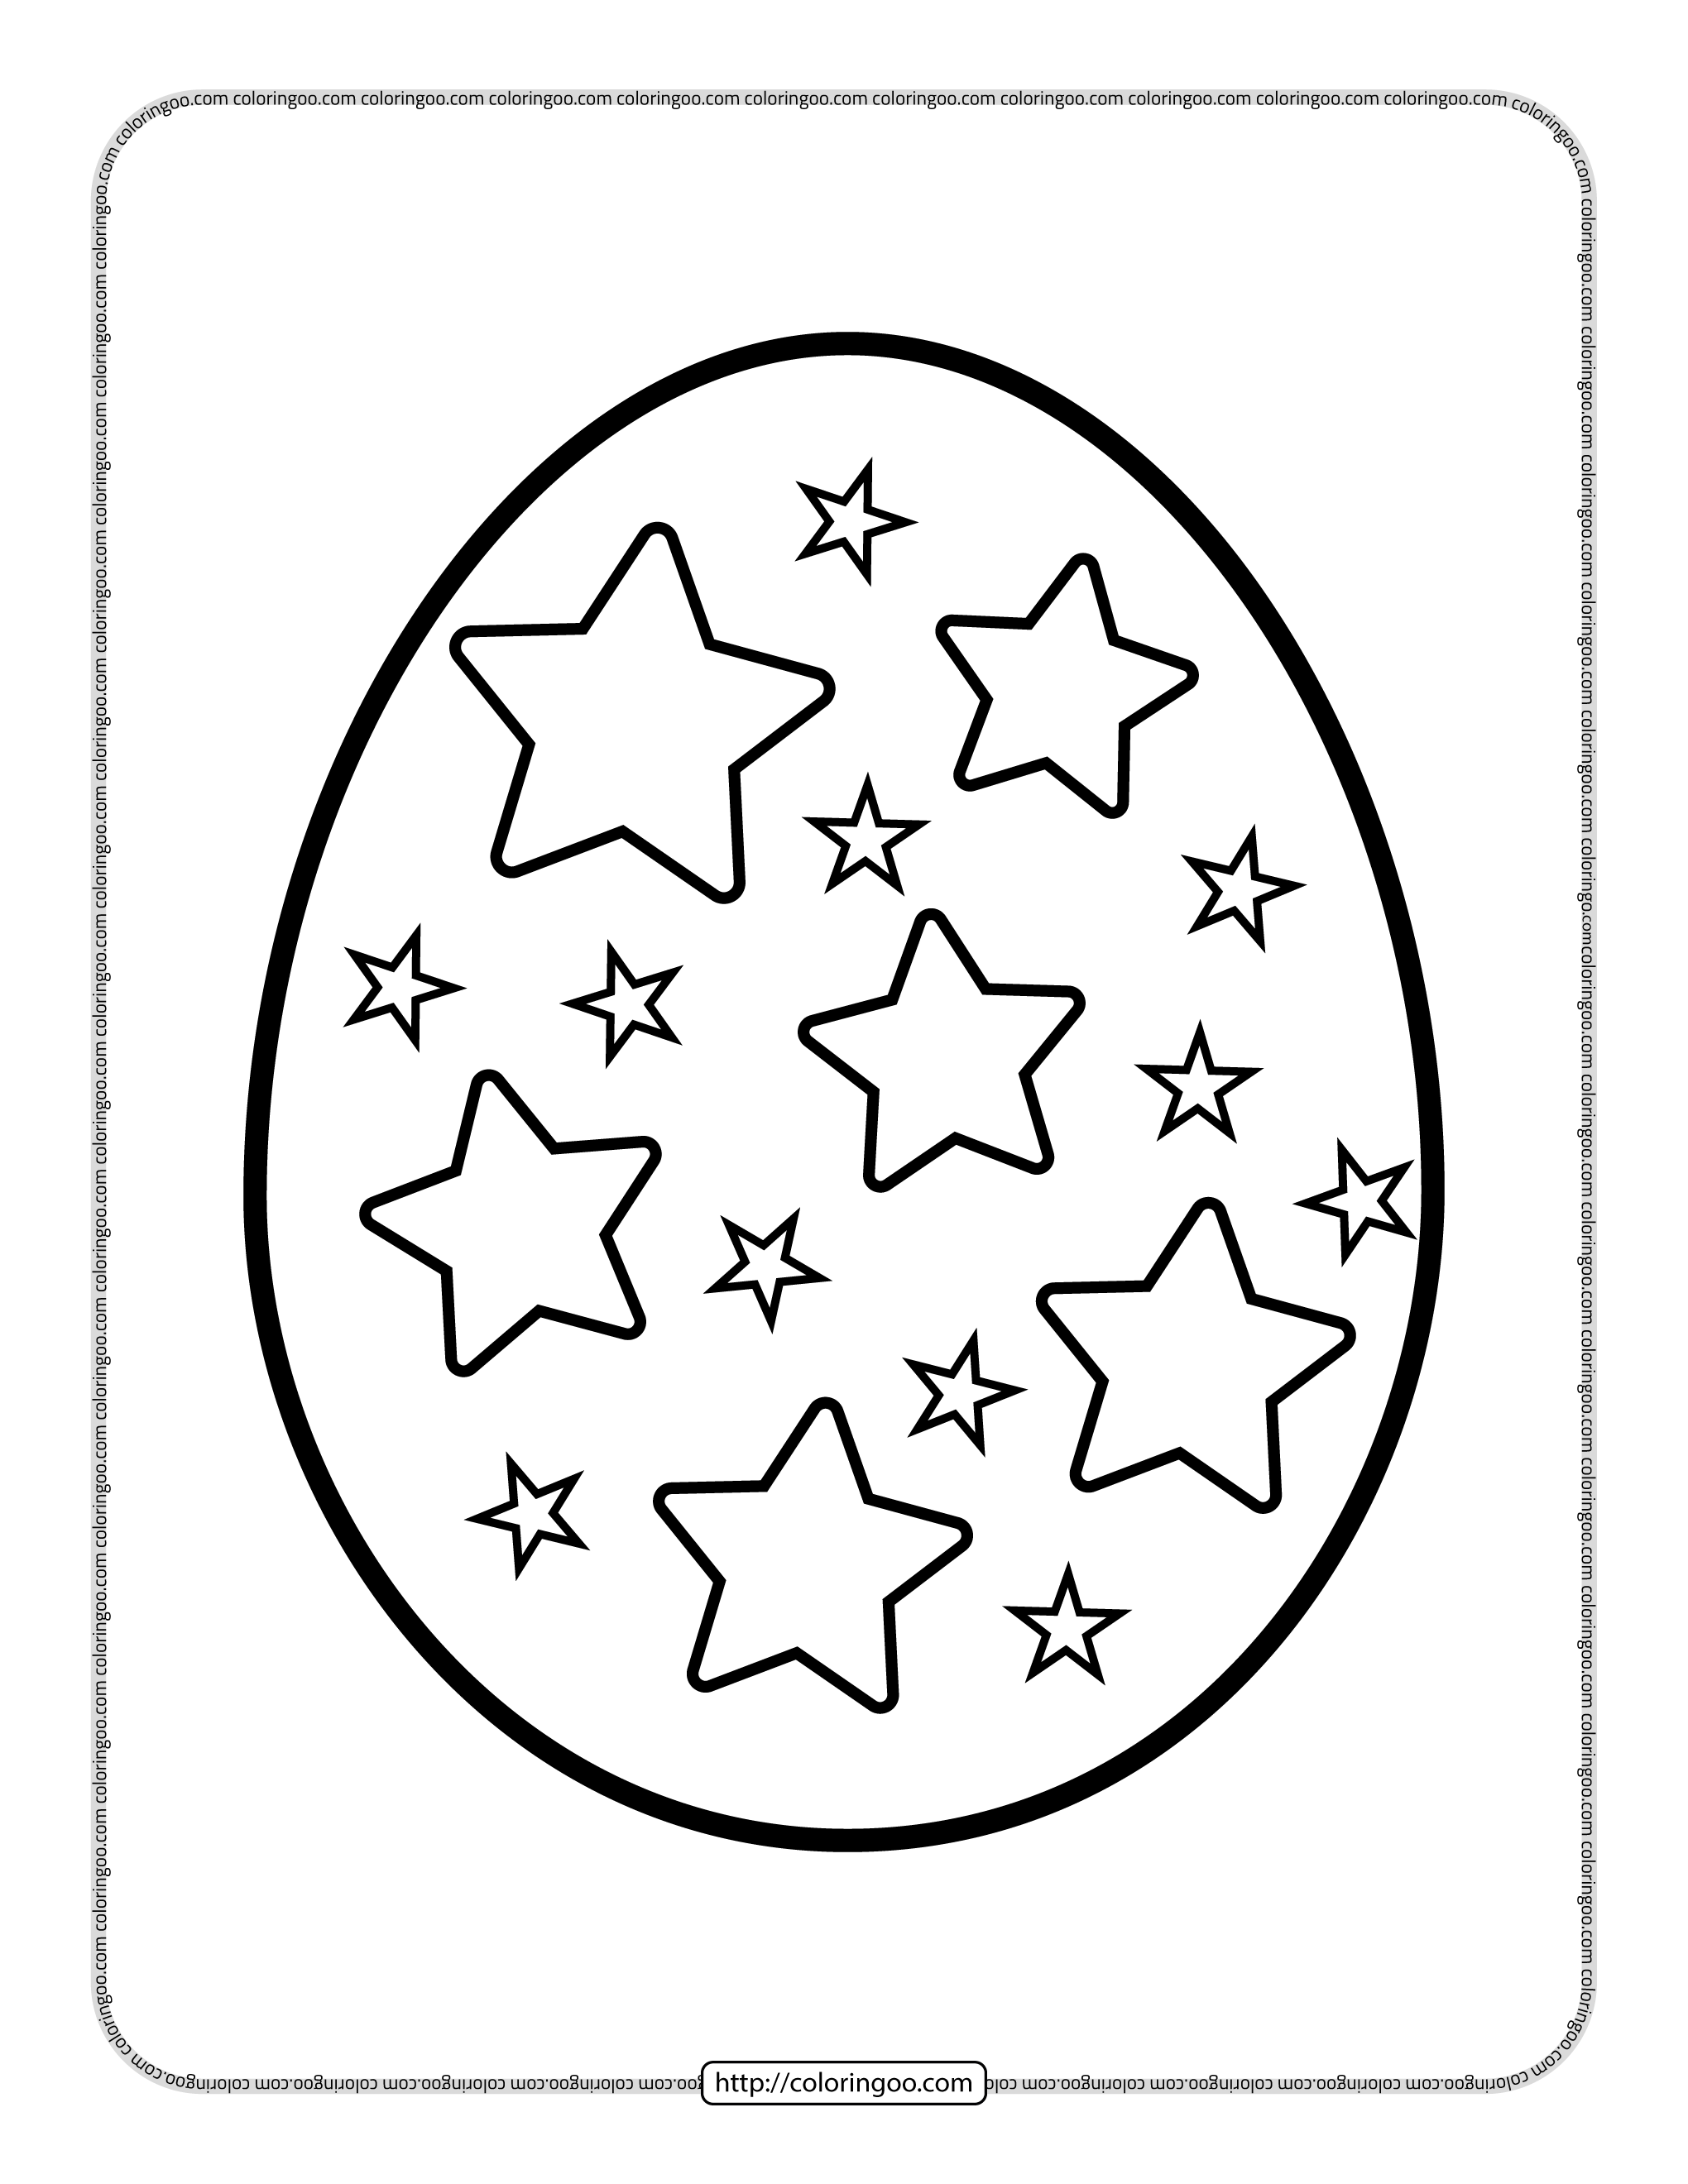 starry easter egg pdf coloring page